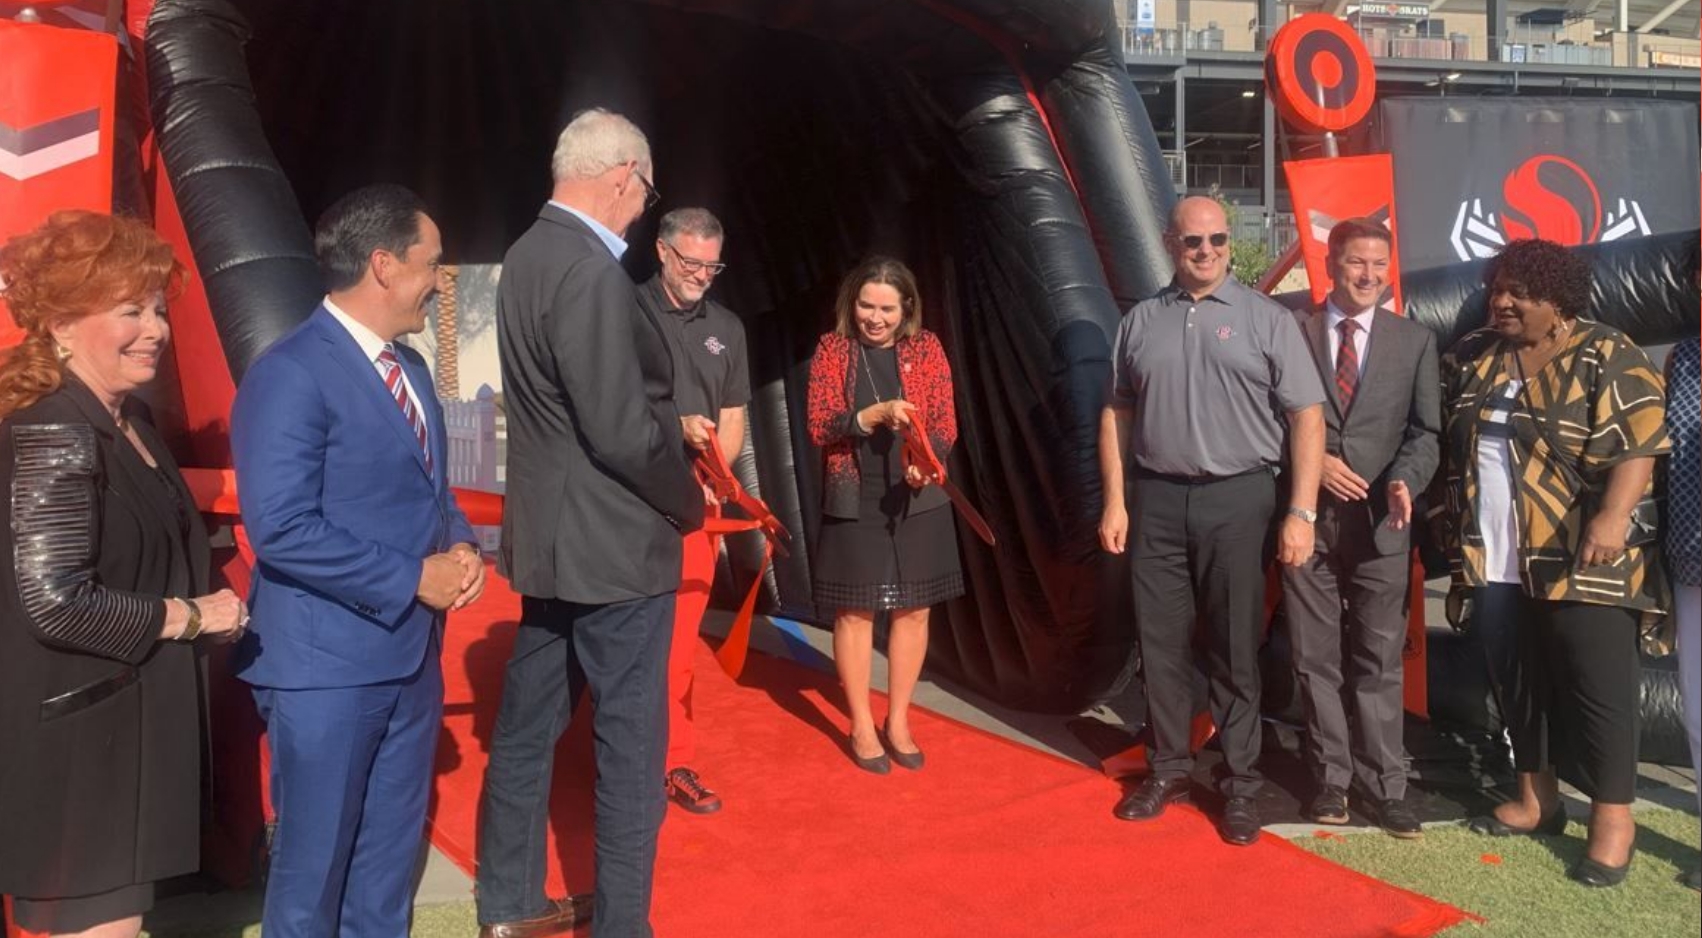 With the vision of SDSU Mission Valley quickly taking shape, the 35,000 seat Snapdragon Stadium is in place to serve the region for decades to come.